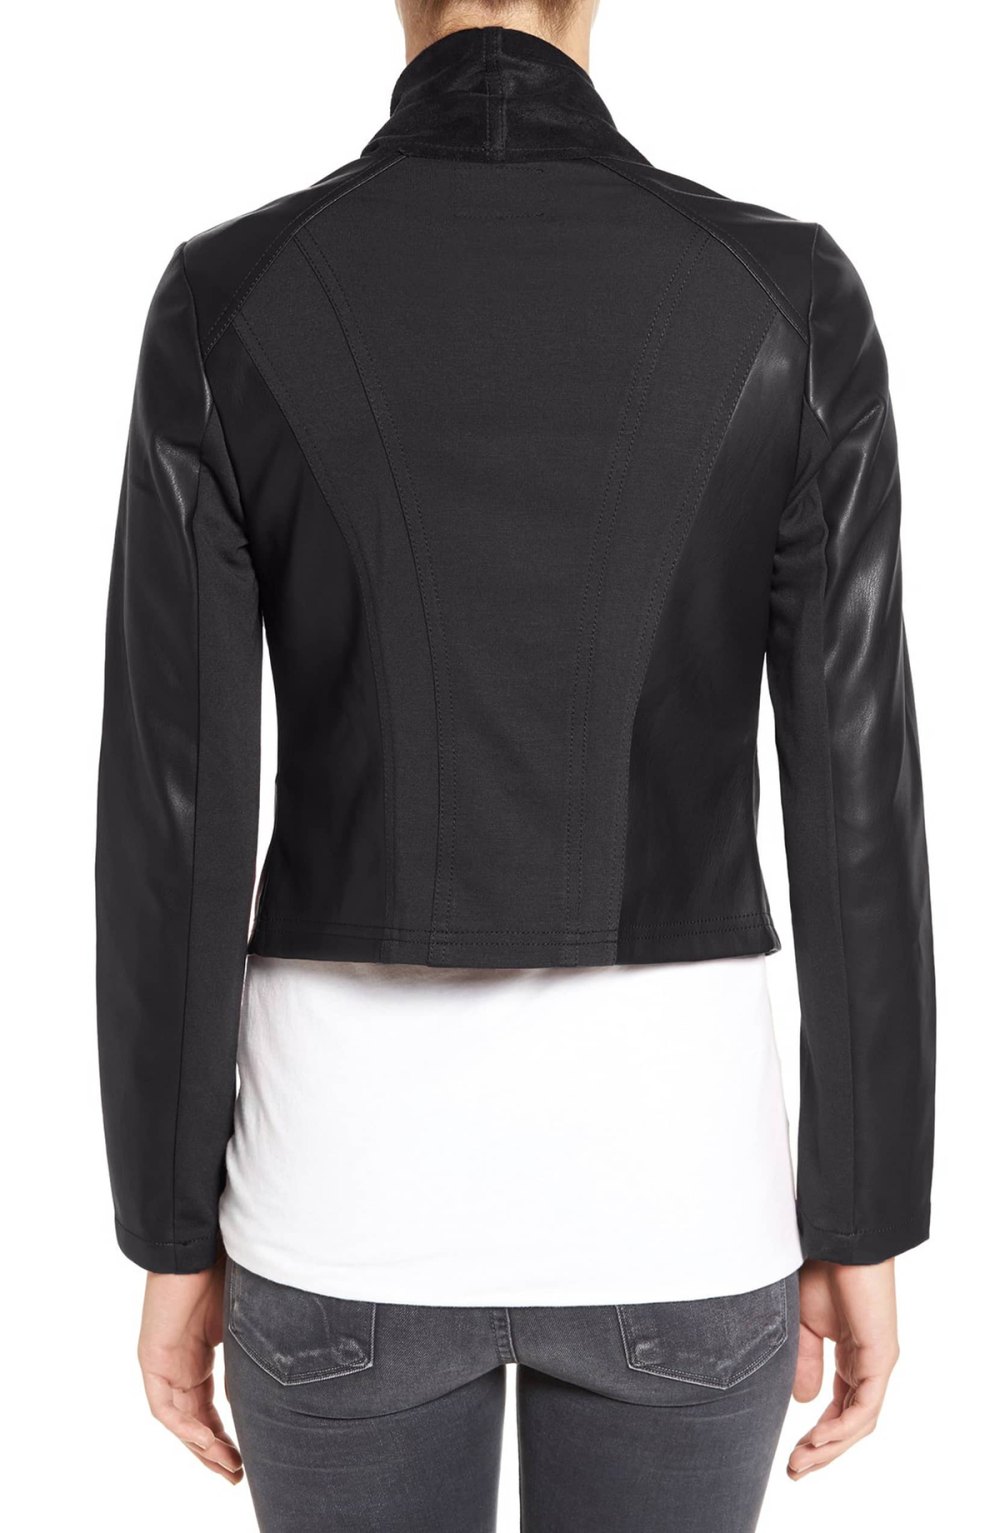 This 50% off Faux-Leather Jacket Is Effortlessly Chic | Us Weekly